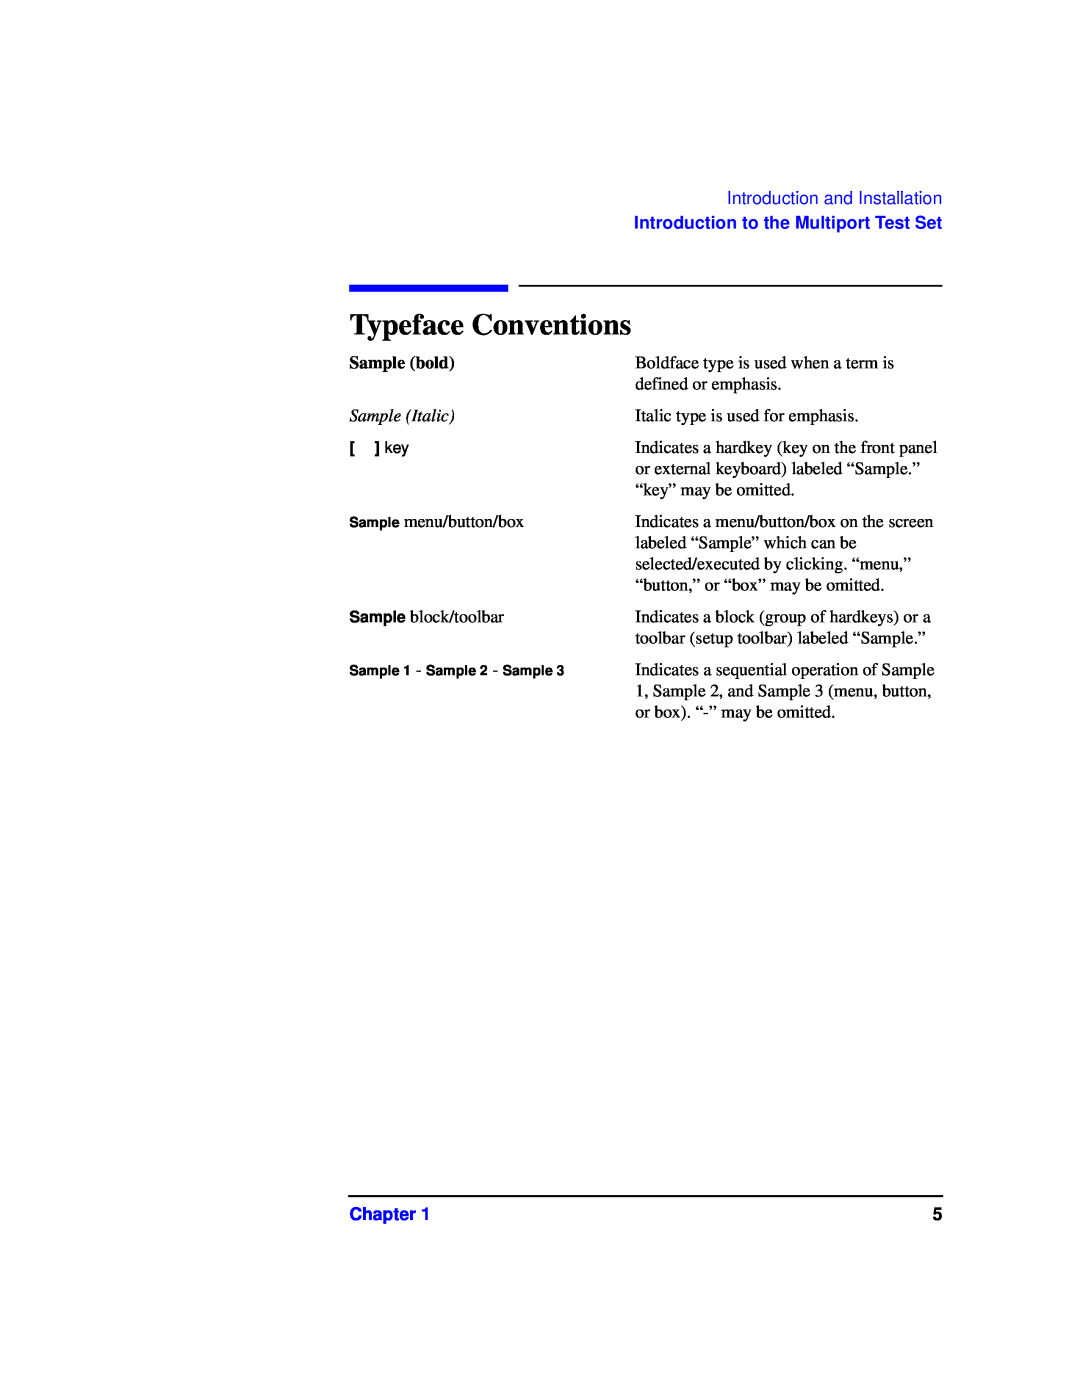 Agilent Technologies 87075C Typeface Conventions, Introduction and Installation, Introduction to the Multiport Test Set 